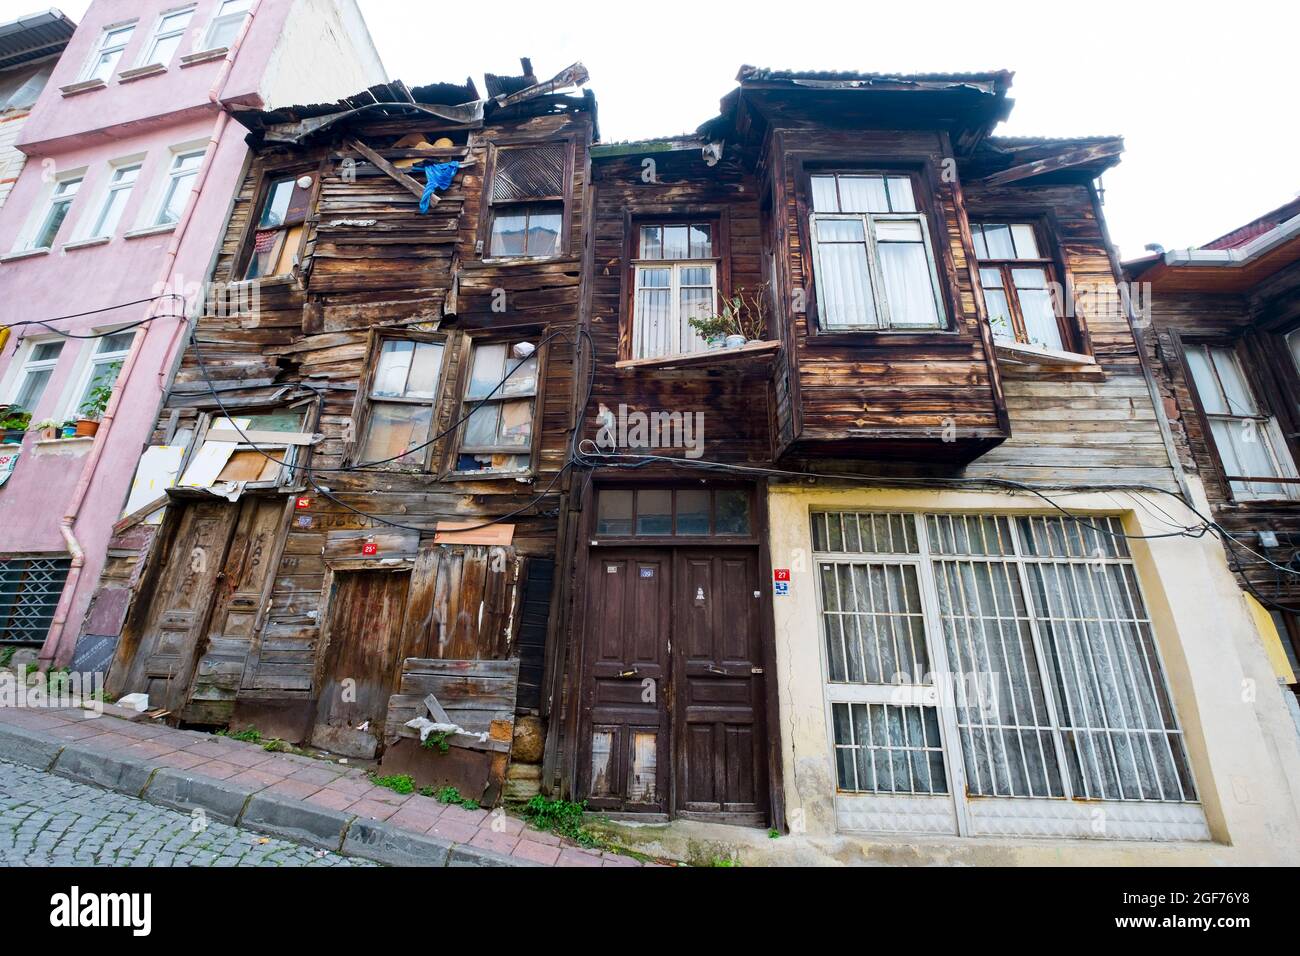 An example of a typical old, poor, worn, falling apart, unpainted, wood siding apartment building in a local neighborhood. In Istanbul, Turkey. Stock Photo